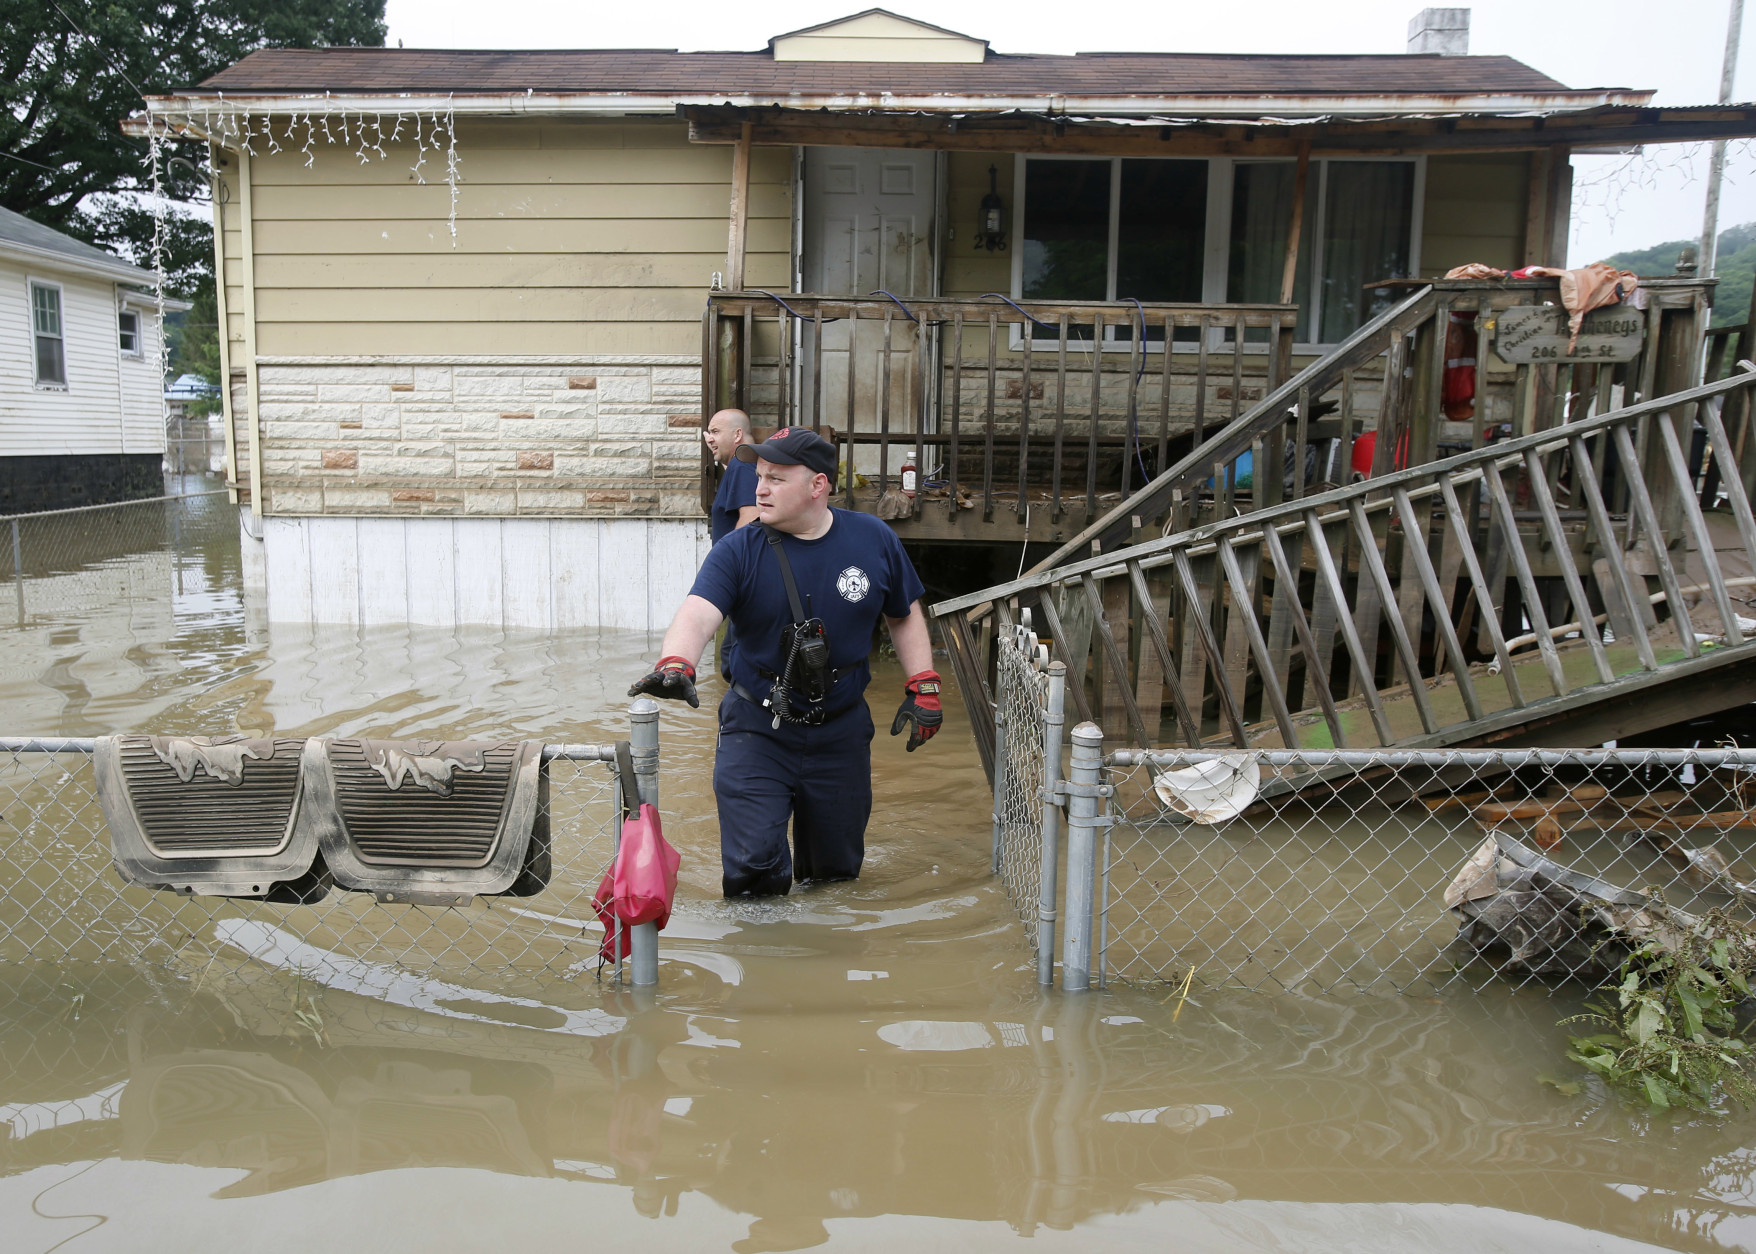 Bridgeport W.Va. fireman, Ryan Moran, exits a home as he and a crew search homes in Rainelle, W.Va., Saturday, June 25, 2016. Heavy rains that pummeled West Virginia left multiple people dead, and authorities said Saturday that an unknown number of people in the hardest-hit county remained unaccounted for.  (AP Photo/Steve Helber)